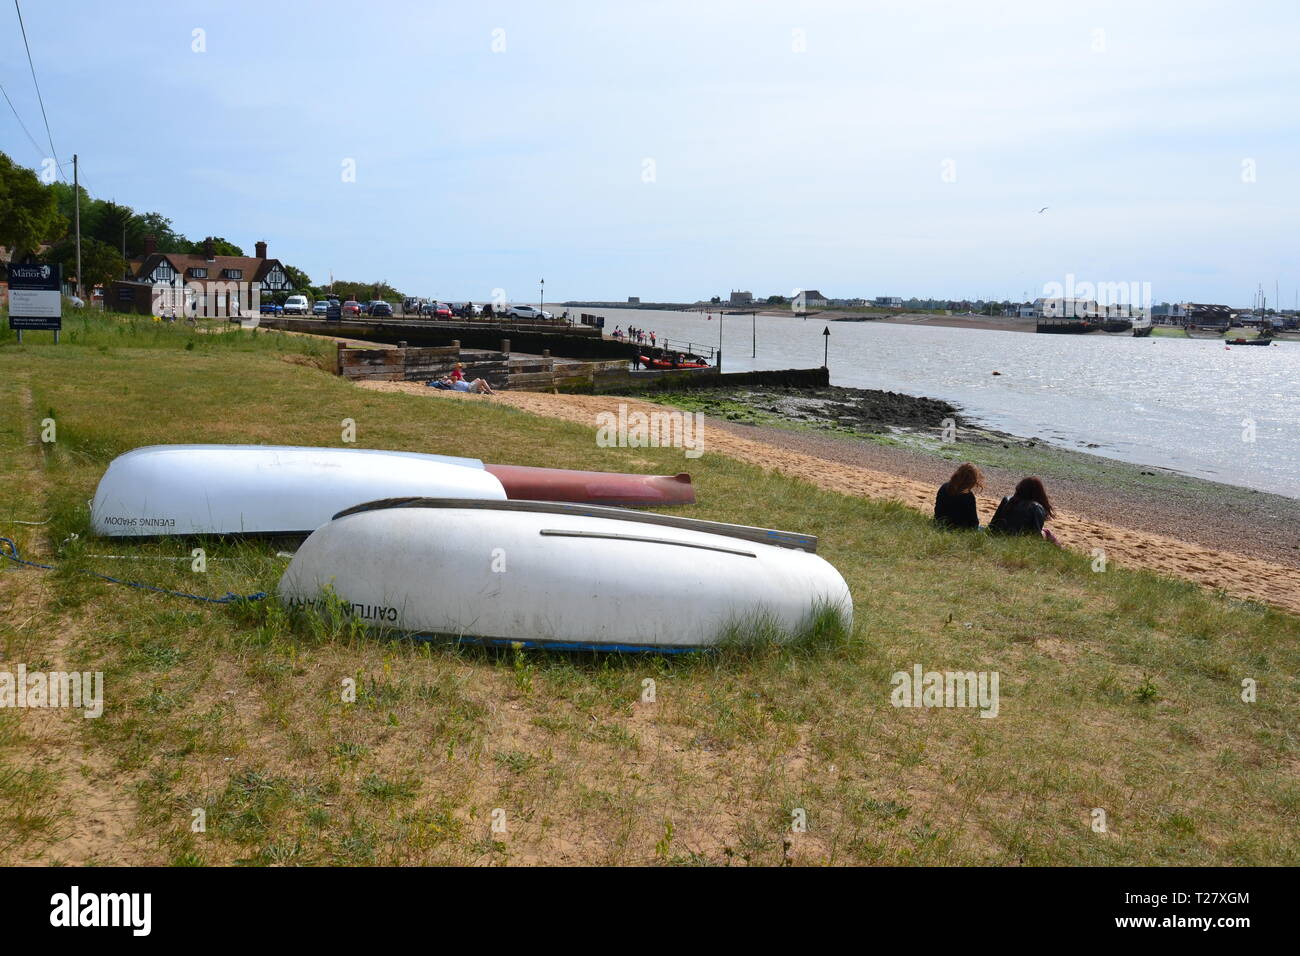 The River Deben and the beach at Bawdsey, Suffolk, England, UK Stock Photo